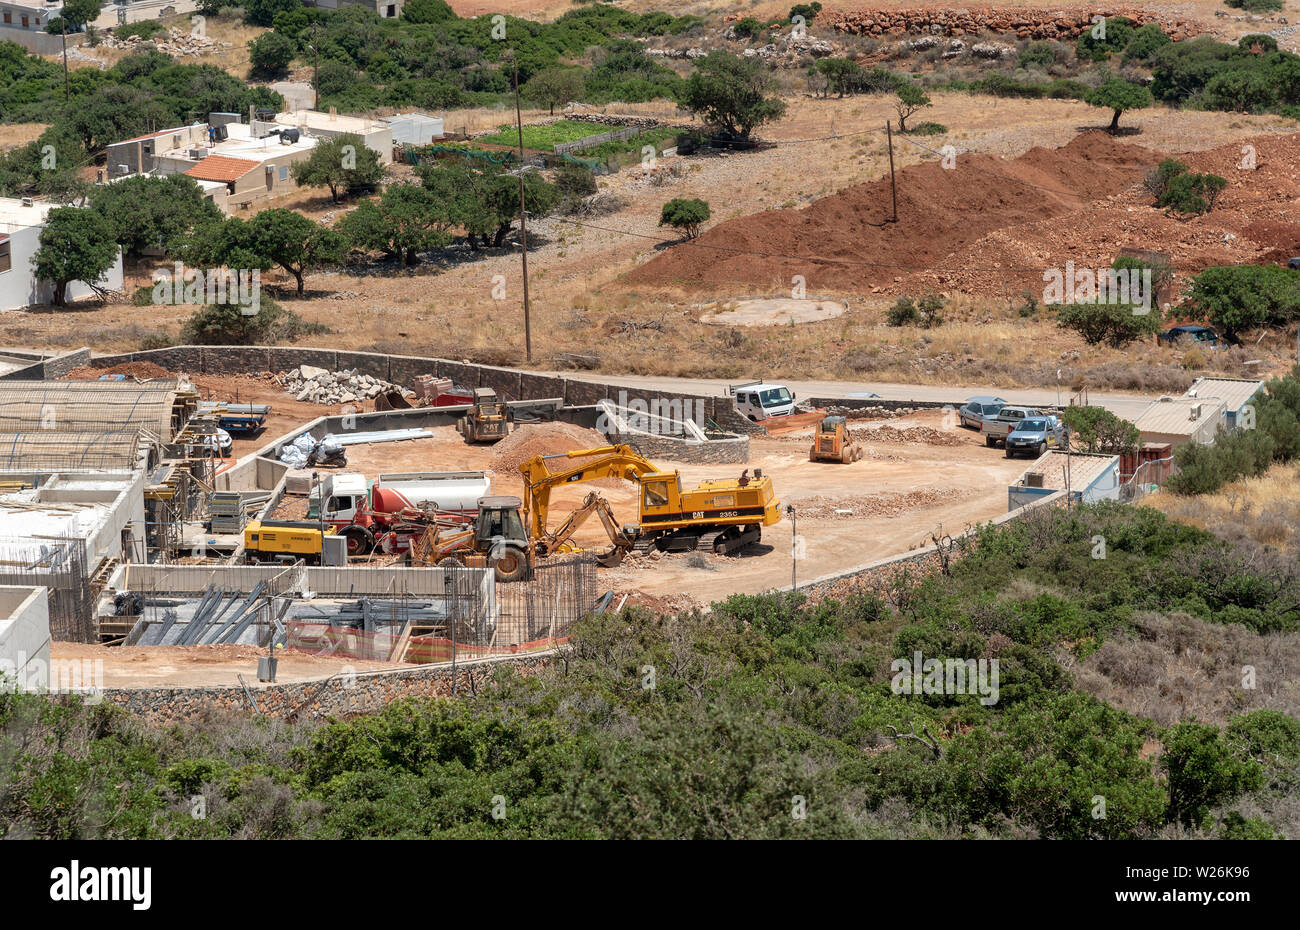 Plaka, Crete, Greece. June 2019. Construction work being carried out behind the coastal village of Plaka. Building new homes and apartments. Stock Photo